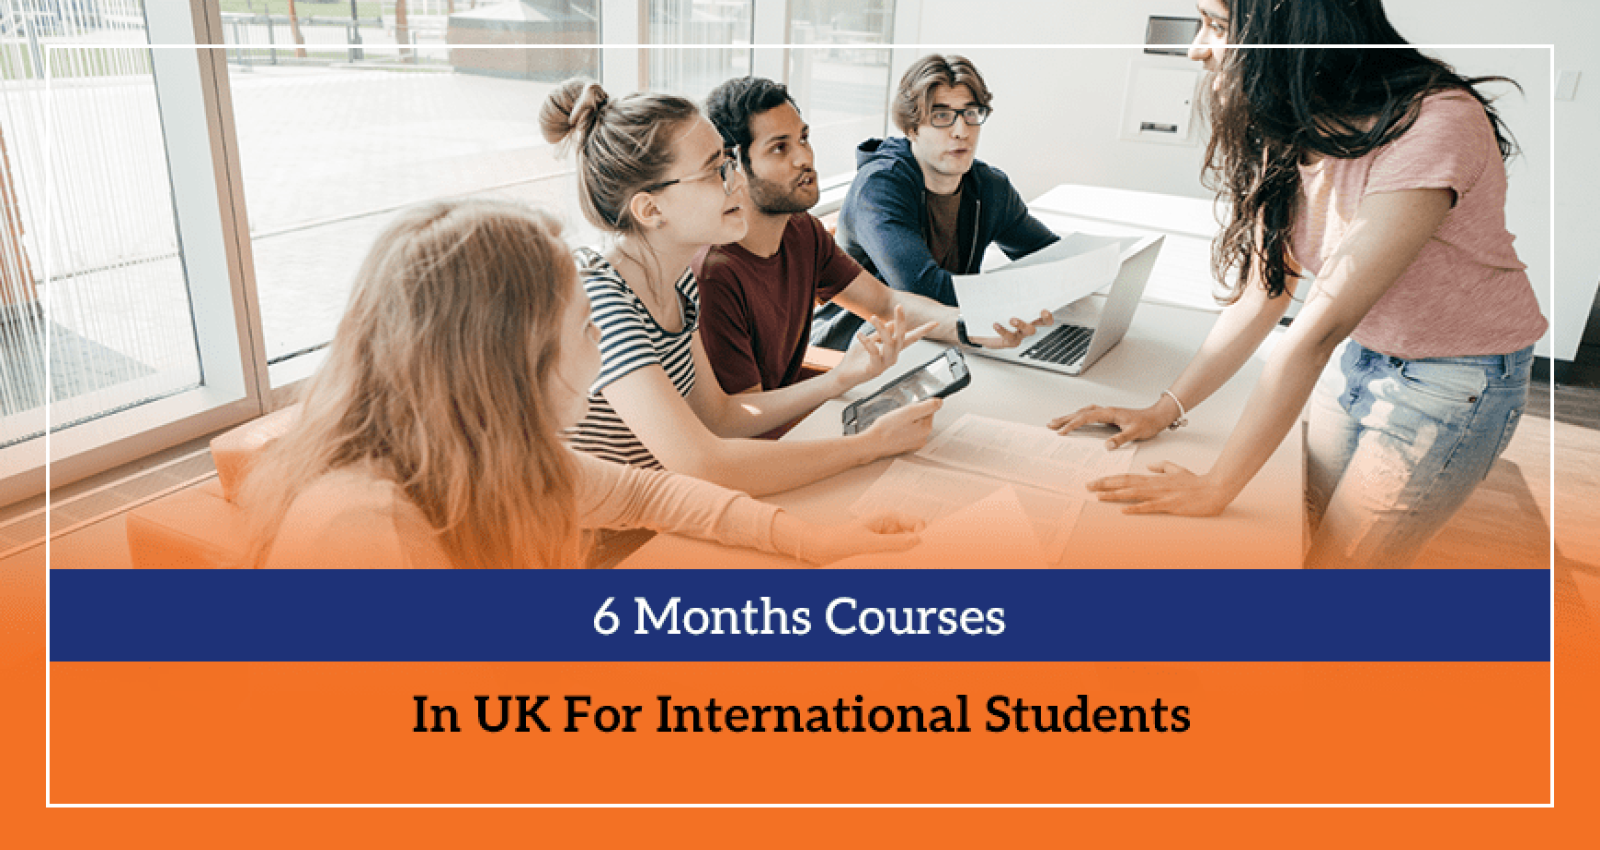 6 Months Courses In UK For International Students